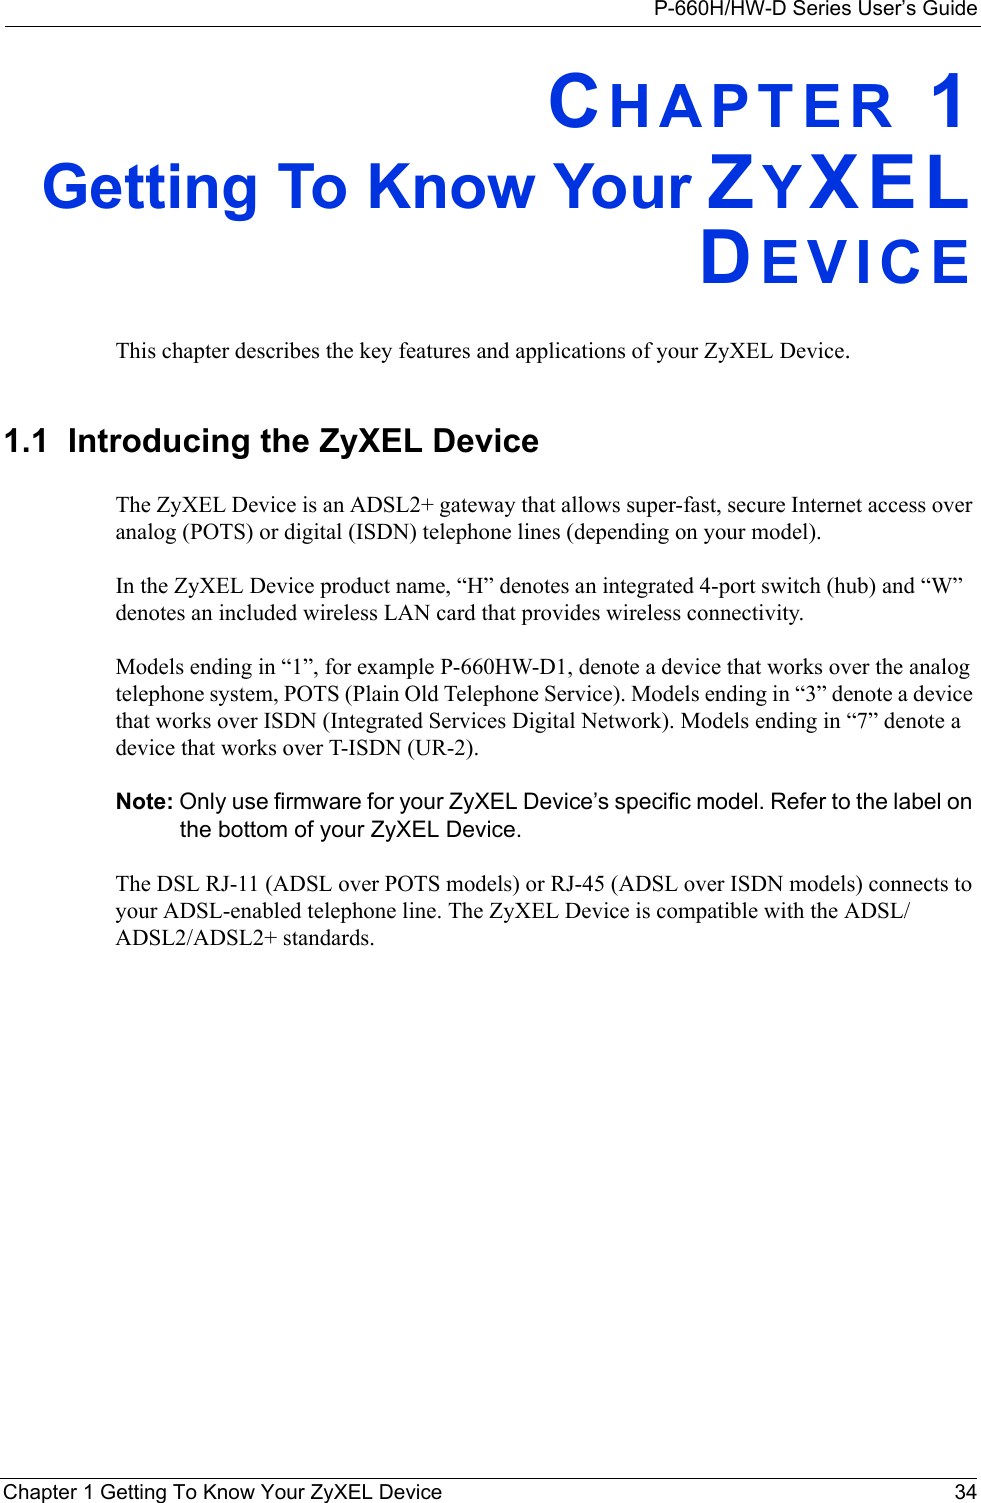 P-660H/HW-D Series User’s GuideChapter 1 Getting To Know Your ZyXEL Device 34CHAPTER 1Getting To Know Your ZYXELDEVICEThis chapter describes the key features and applications of your ZyXEL Device.1.1  Introducing the ZyXEL Device The ZyXEL Device is an ADSL2+ gateway that allows super-fast, secure Internet access over analog (POTS) or digital (ISDN) telephone lines (depending on your model). In the ZyXEL Device product name, “H” denotes an integrated 4-port switch (hub) and “W” denotes an included wireless LAN card that provides wireless connectivity. Models ending in “1”, for example P-660HW-D1, denote a device that works over the analog telephone system, POTS (Plain Old Telephone Service). Models ending in “3” denote a device that works over ISDN (Integrated Services Digital Network). Models ending in “7” denote a device that works over T-ISDN (UR-2).Note: Only use firmware for your ZyXEL Device’s specific model. Refer to the label on the bottom of your ZyXEL Device.The DSL RJ-11 (ADSL over POTS models) or RJ-45 (ADSL over ISDN models) connects to your ADSL-enabled telephone line. The ZyXEL Device is compatible with the ADSL/ADSL2/ADSL2+ standards. 